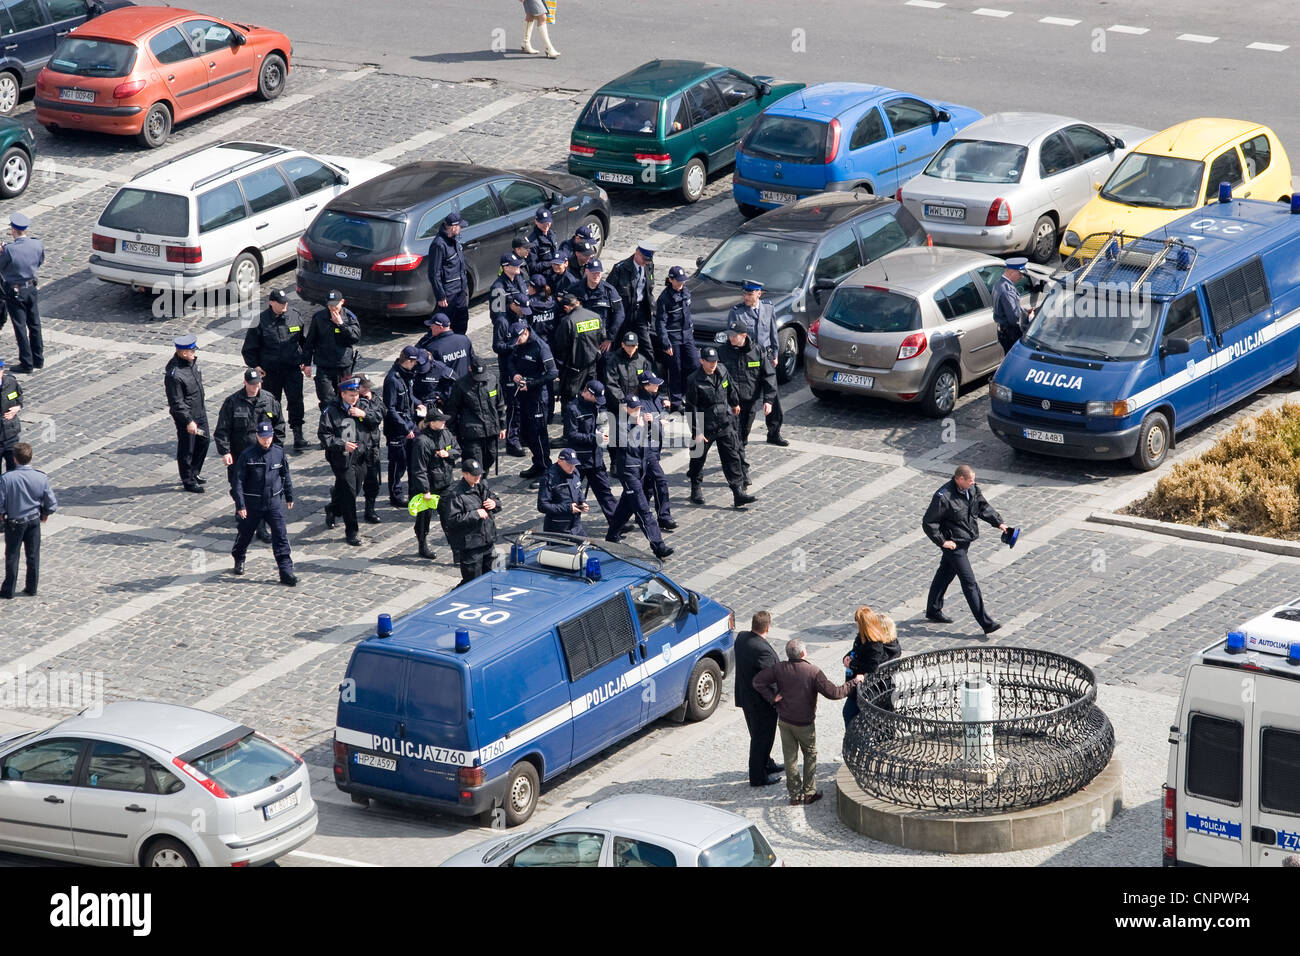 Polish police force gathering in a car park in Warsaw, Poland. Stock Photo